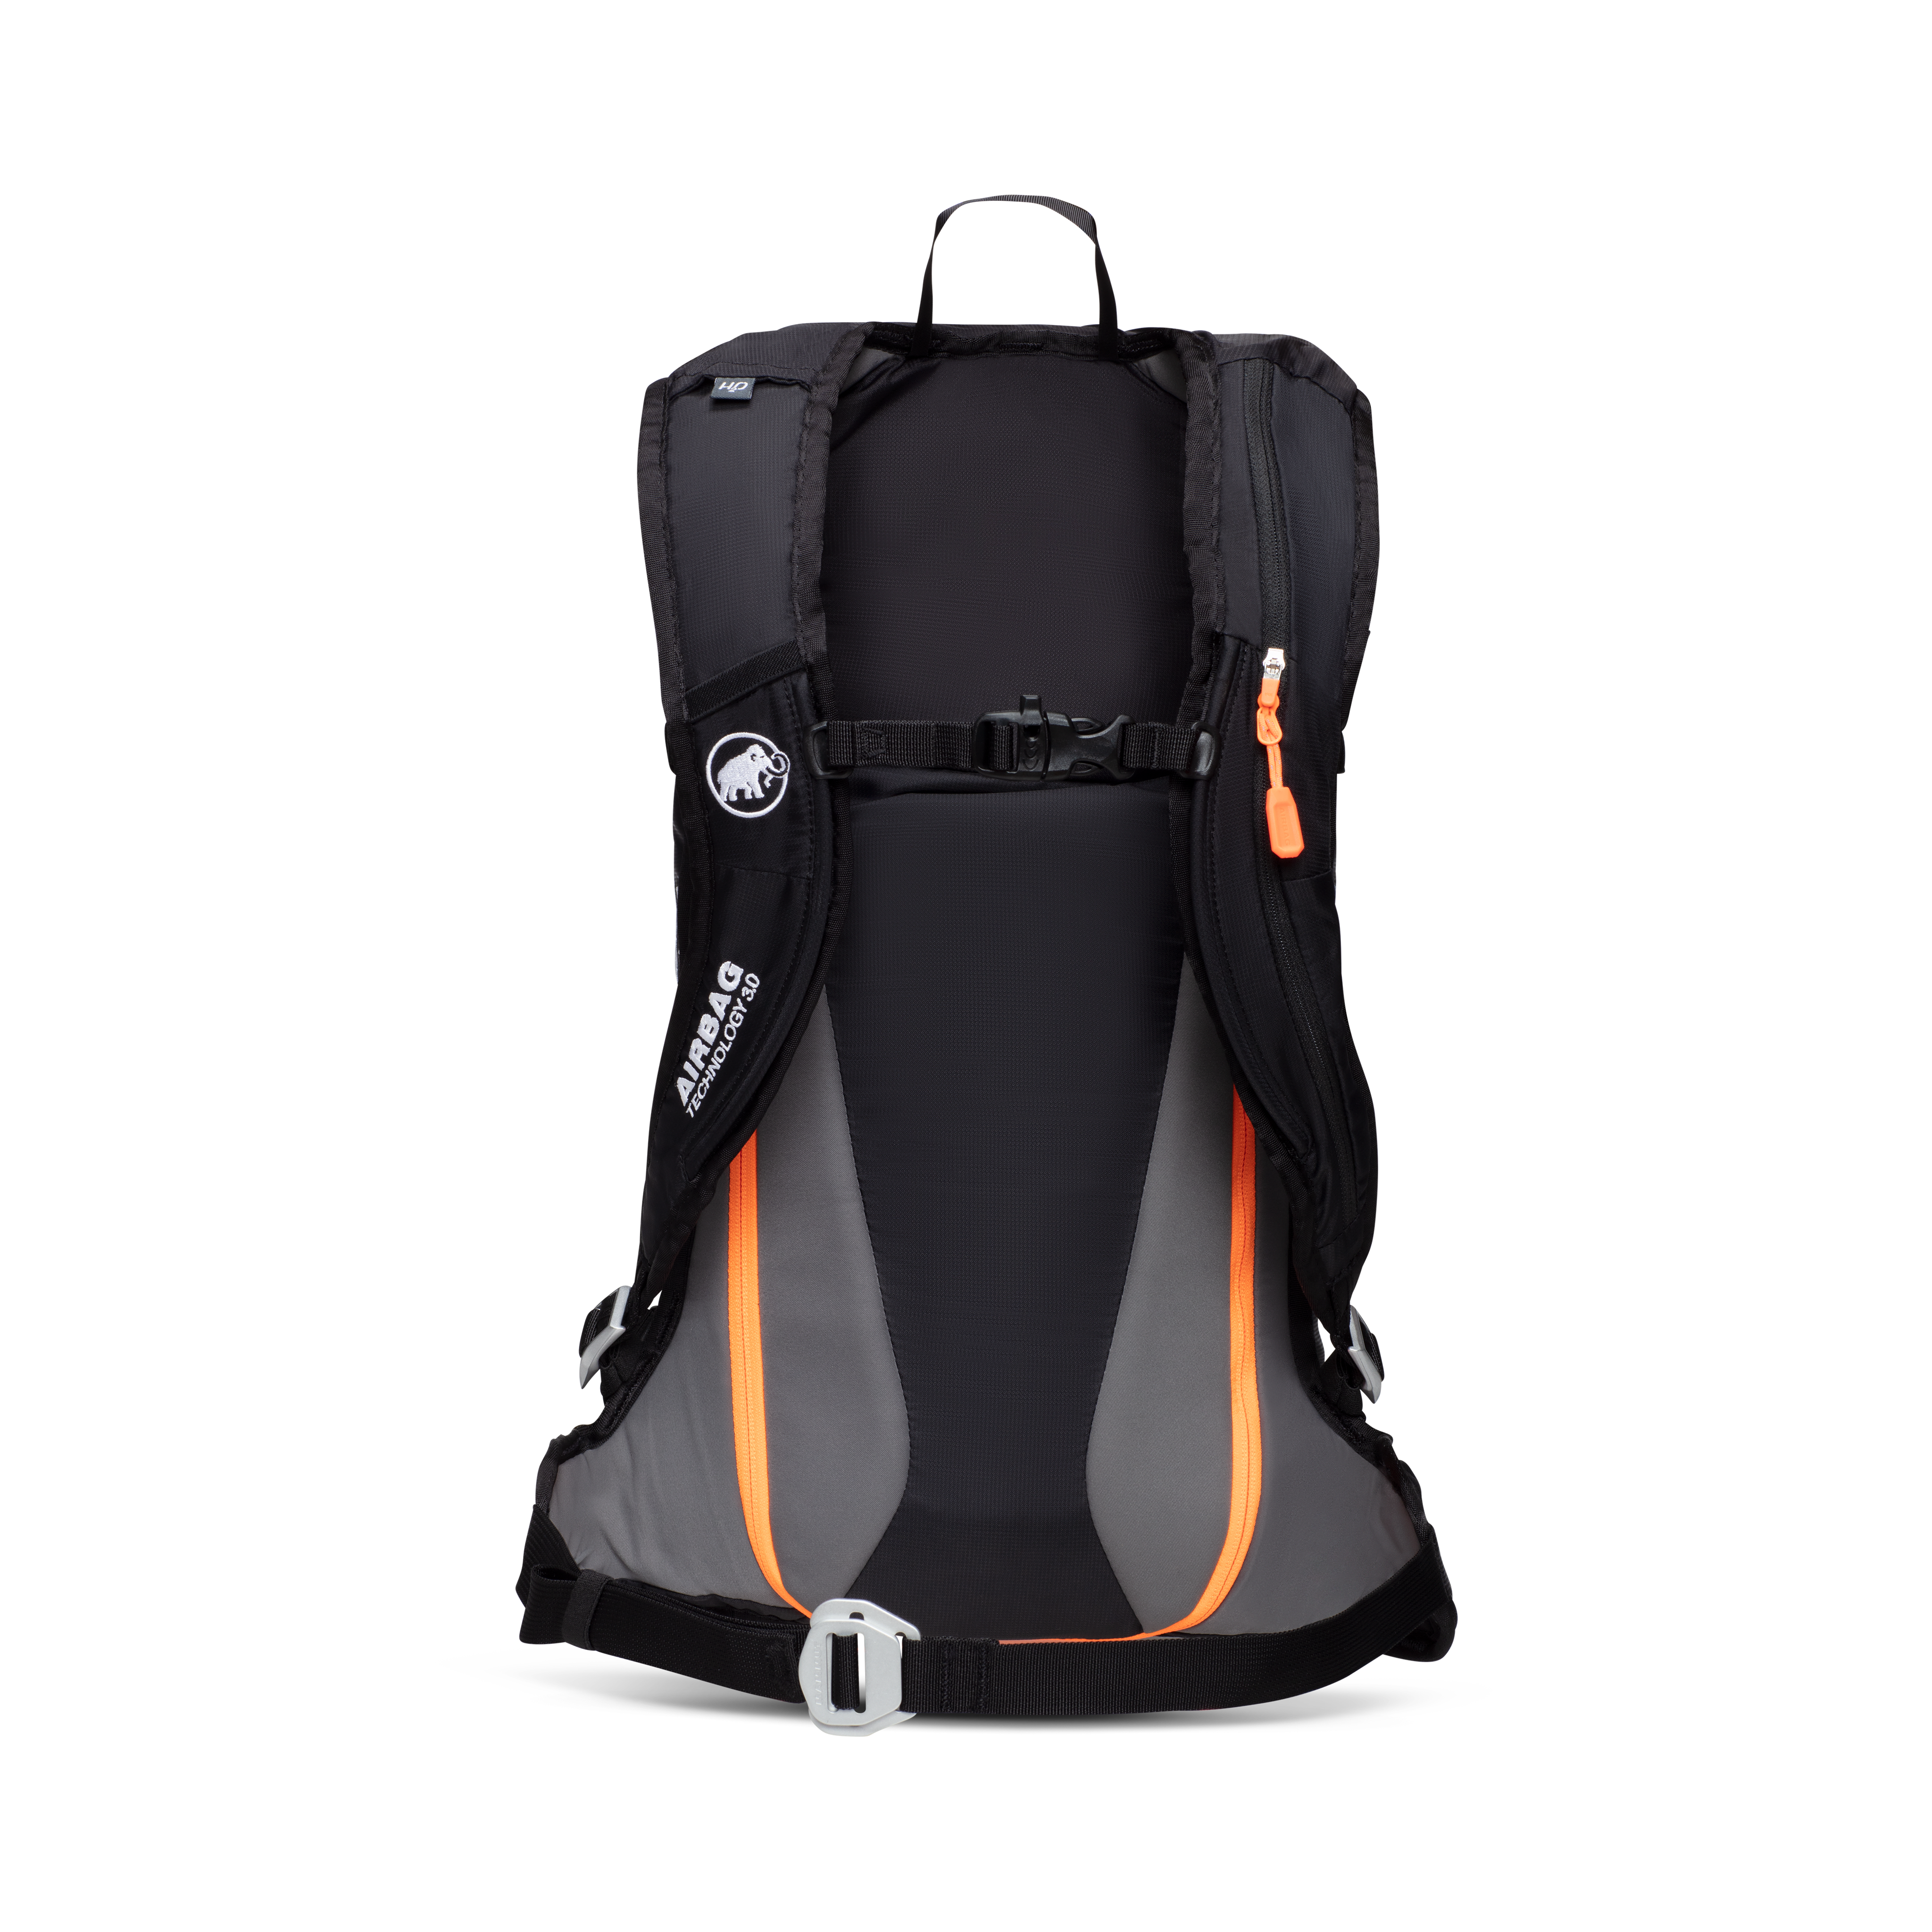 Ultralight Removable Airbag 3.0 product image